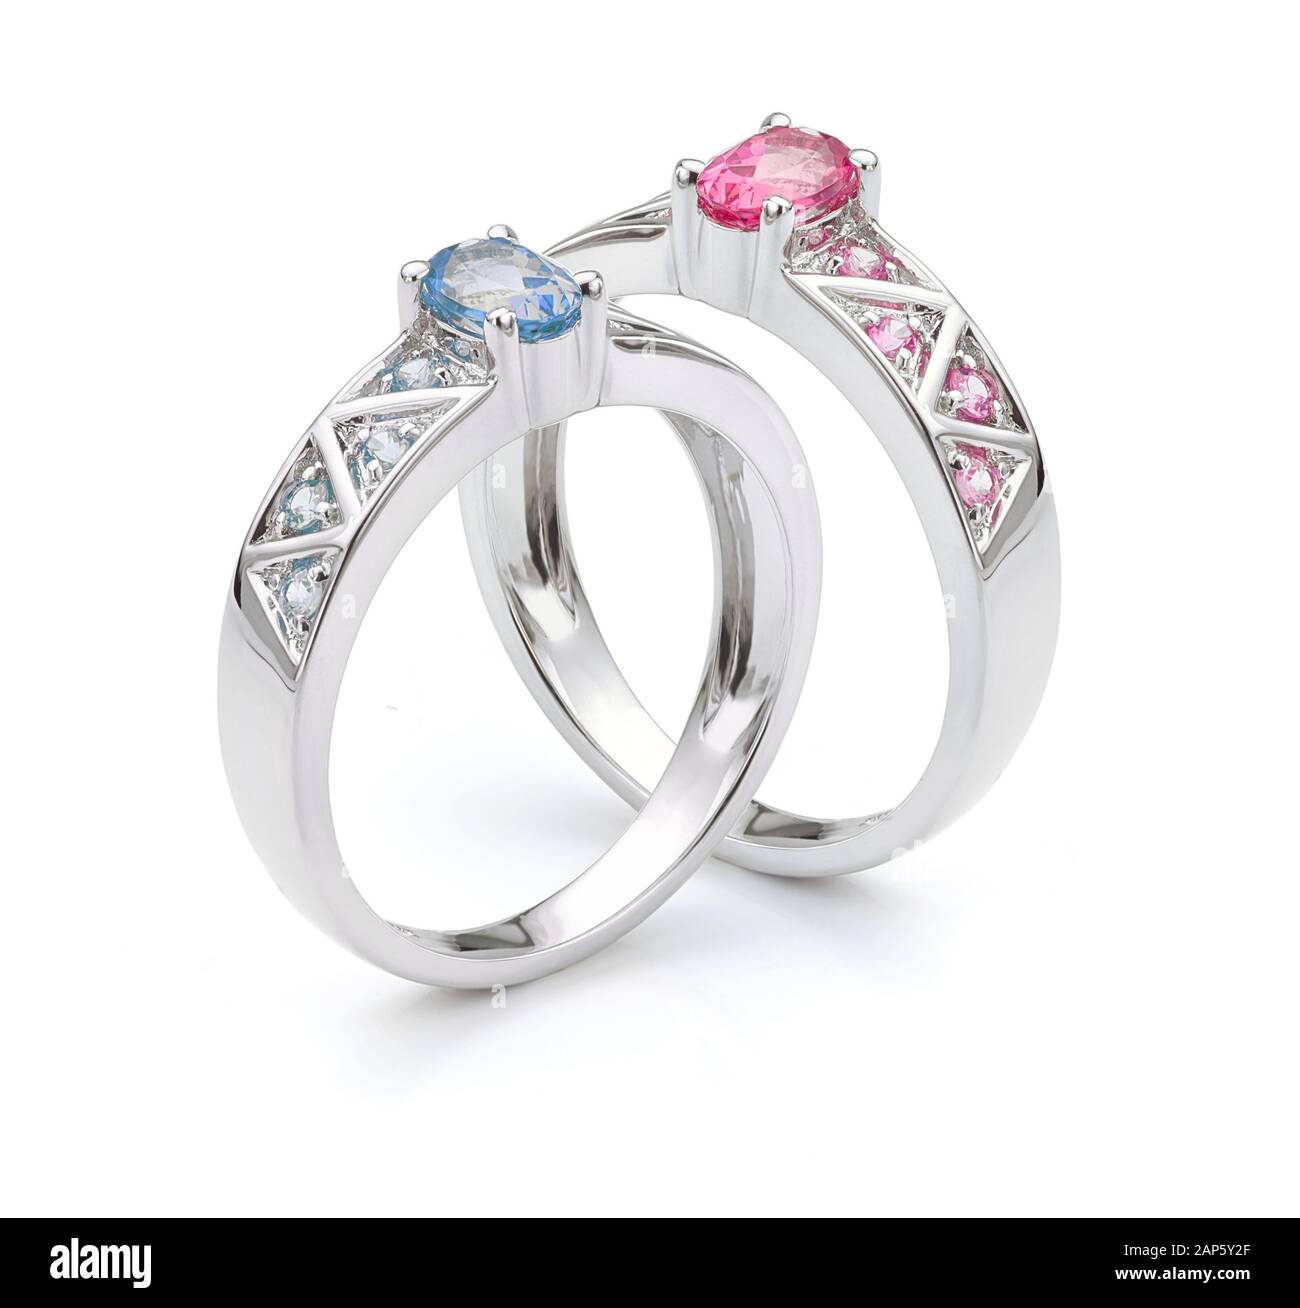 Matching Pink and Blue Sapphire Engagement Rings with Gemstone Shoulders in Silver or White Gold Precious Metal on White Background. Stock Photo